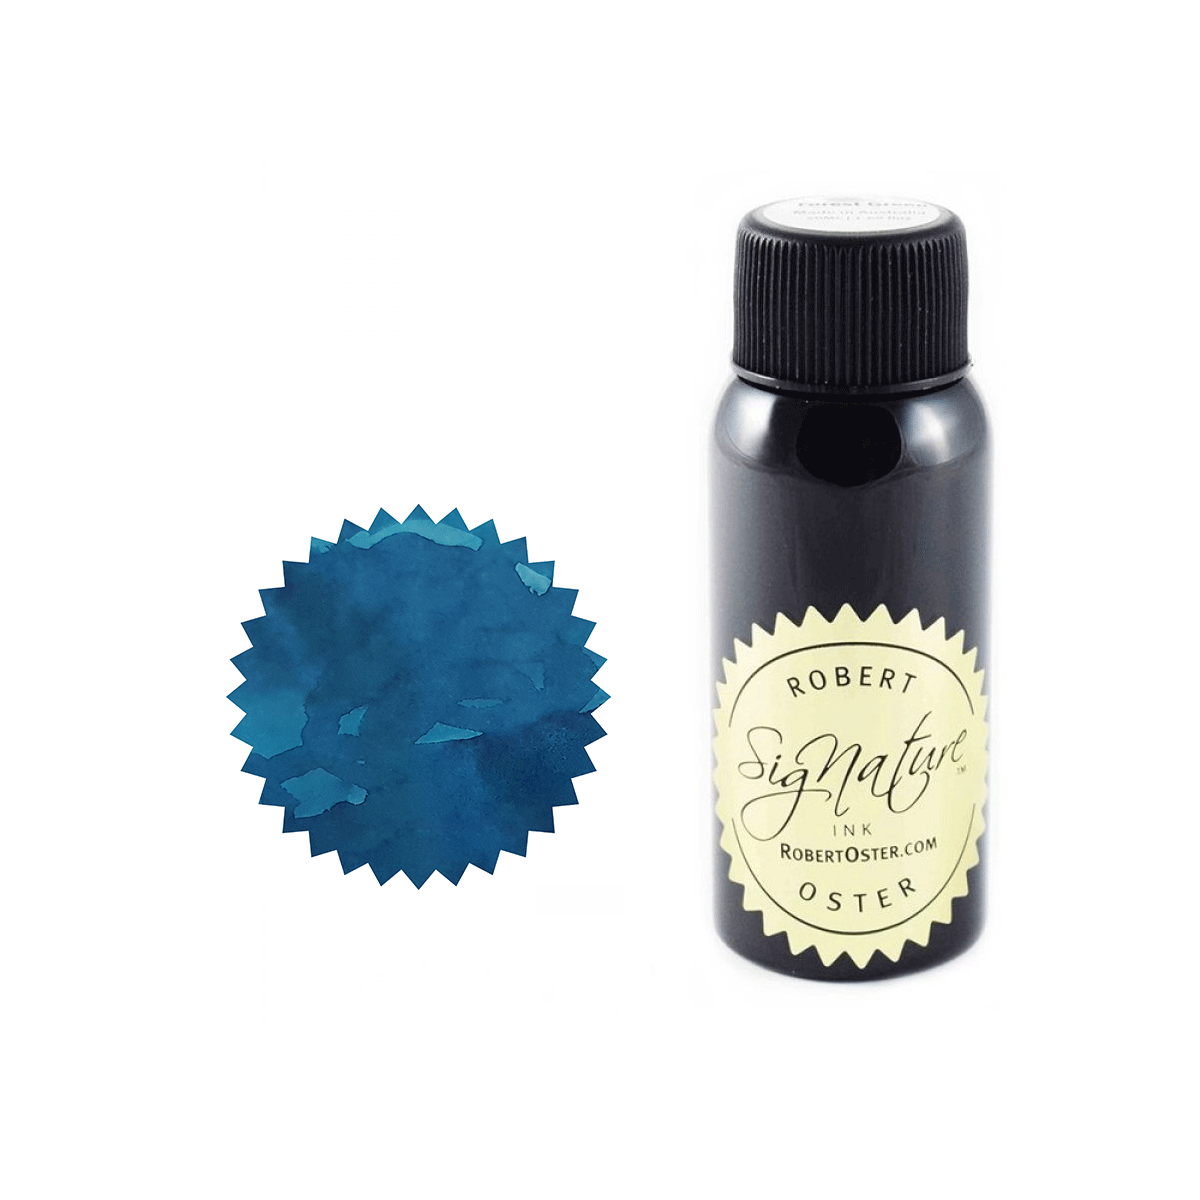 Robert Oster Signature Ink Bottle Frankly Blue - Pencraft the boutique